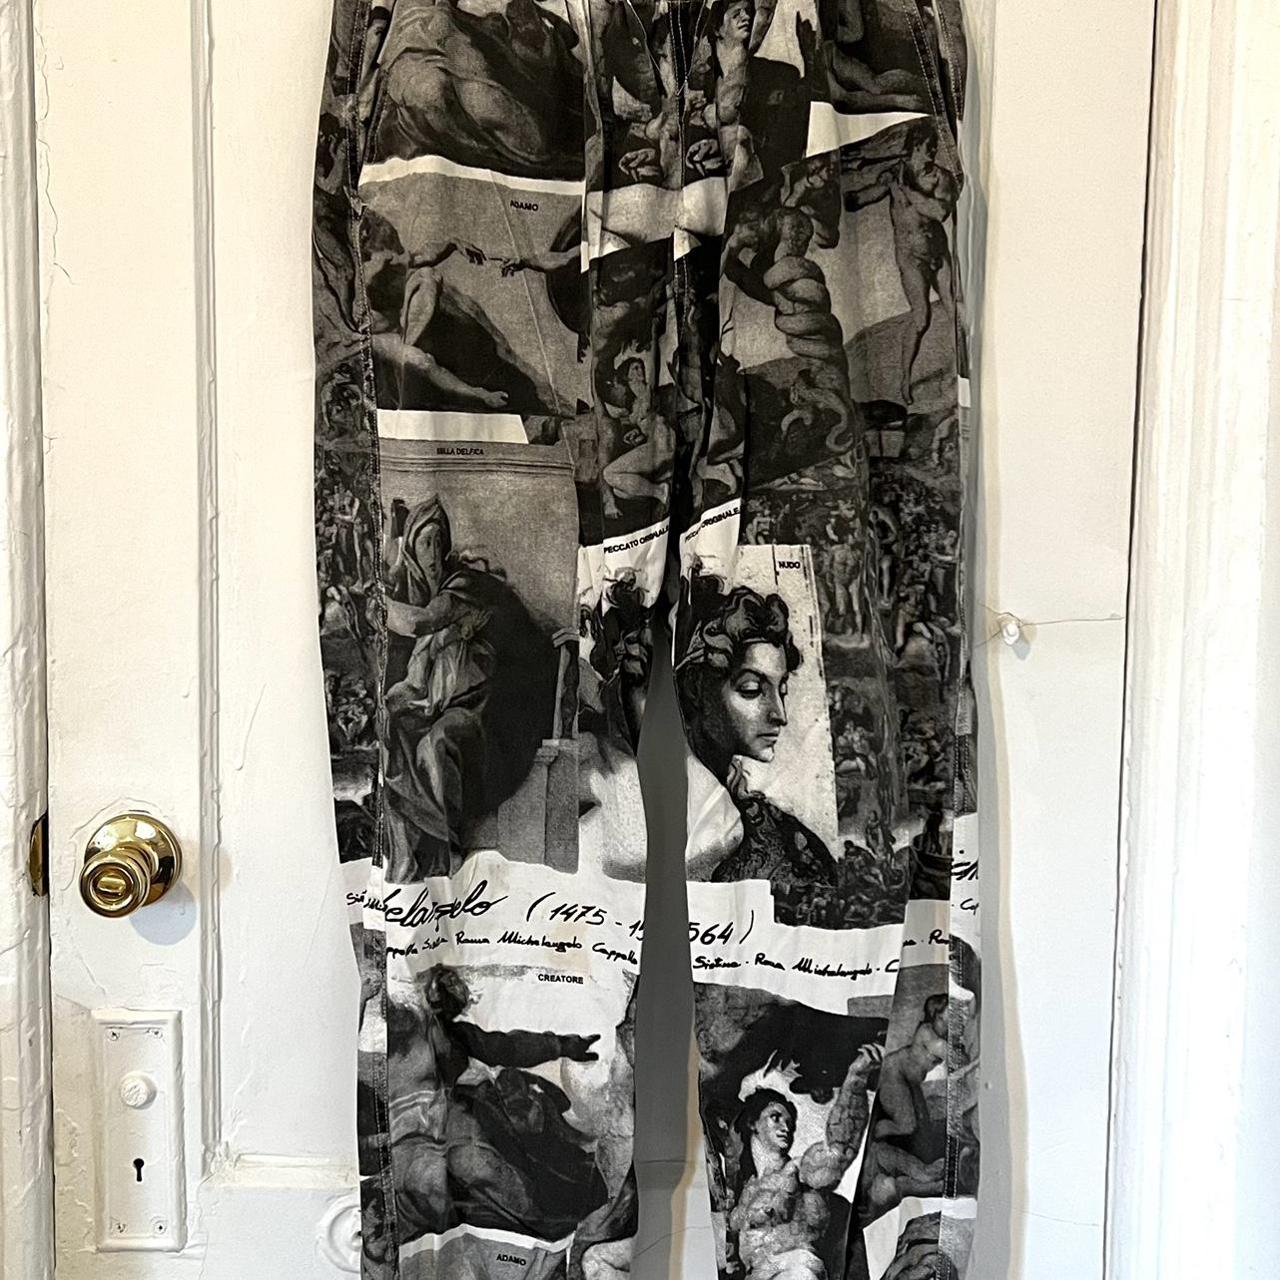 Supreme Michelangelo Skate Pant. FW17. Never been...